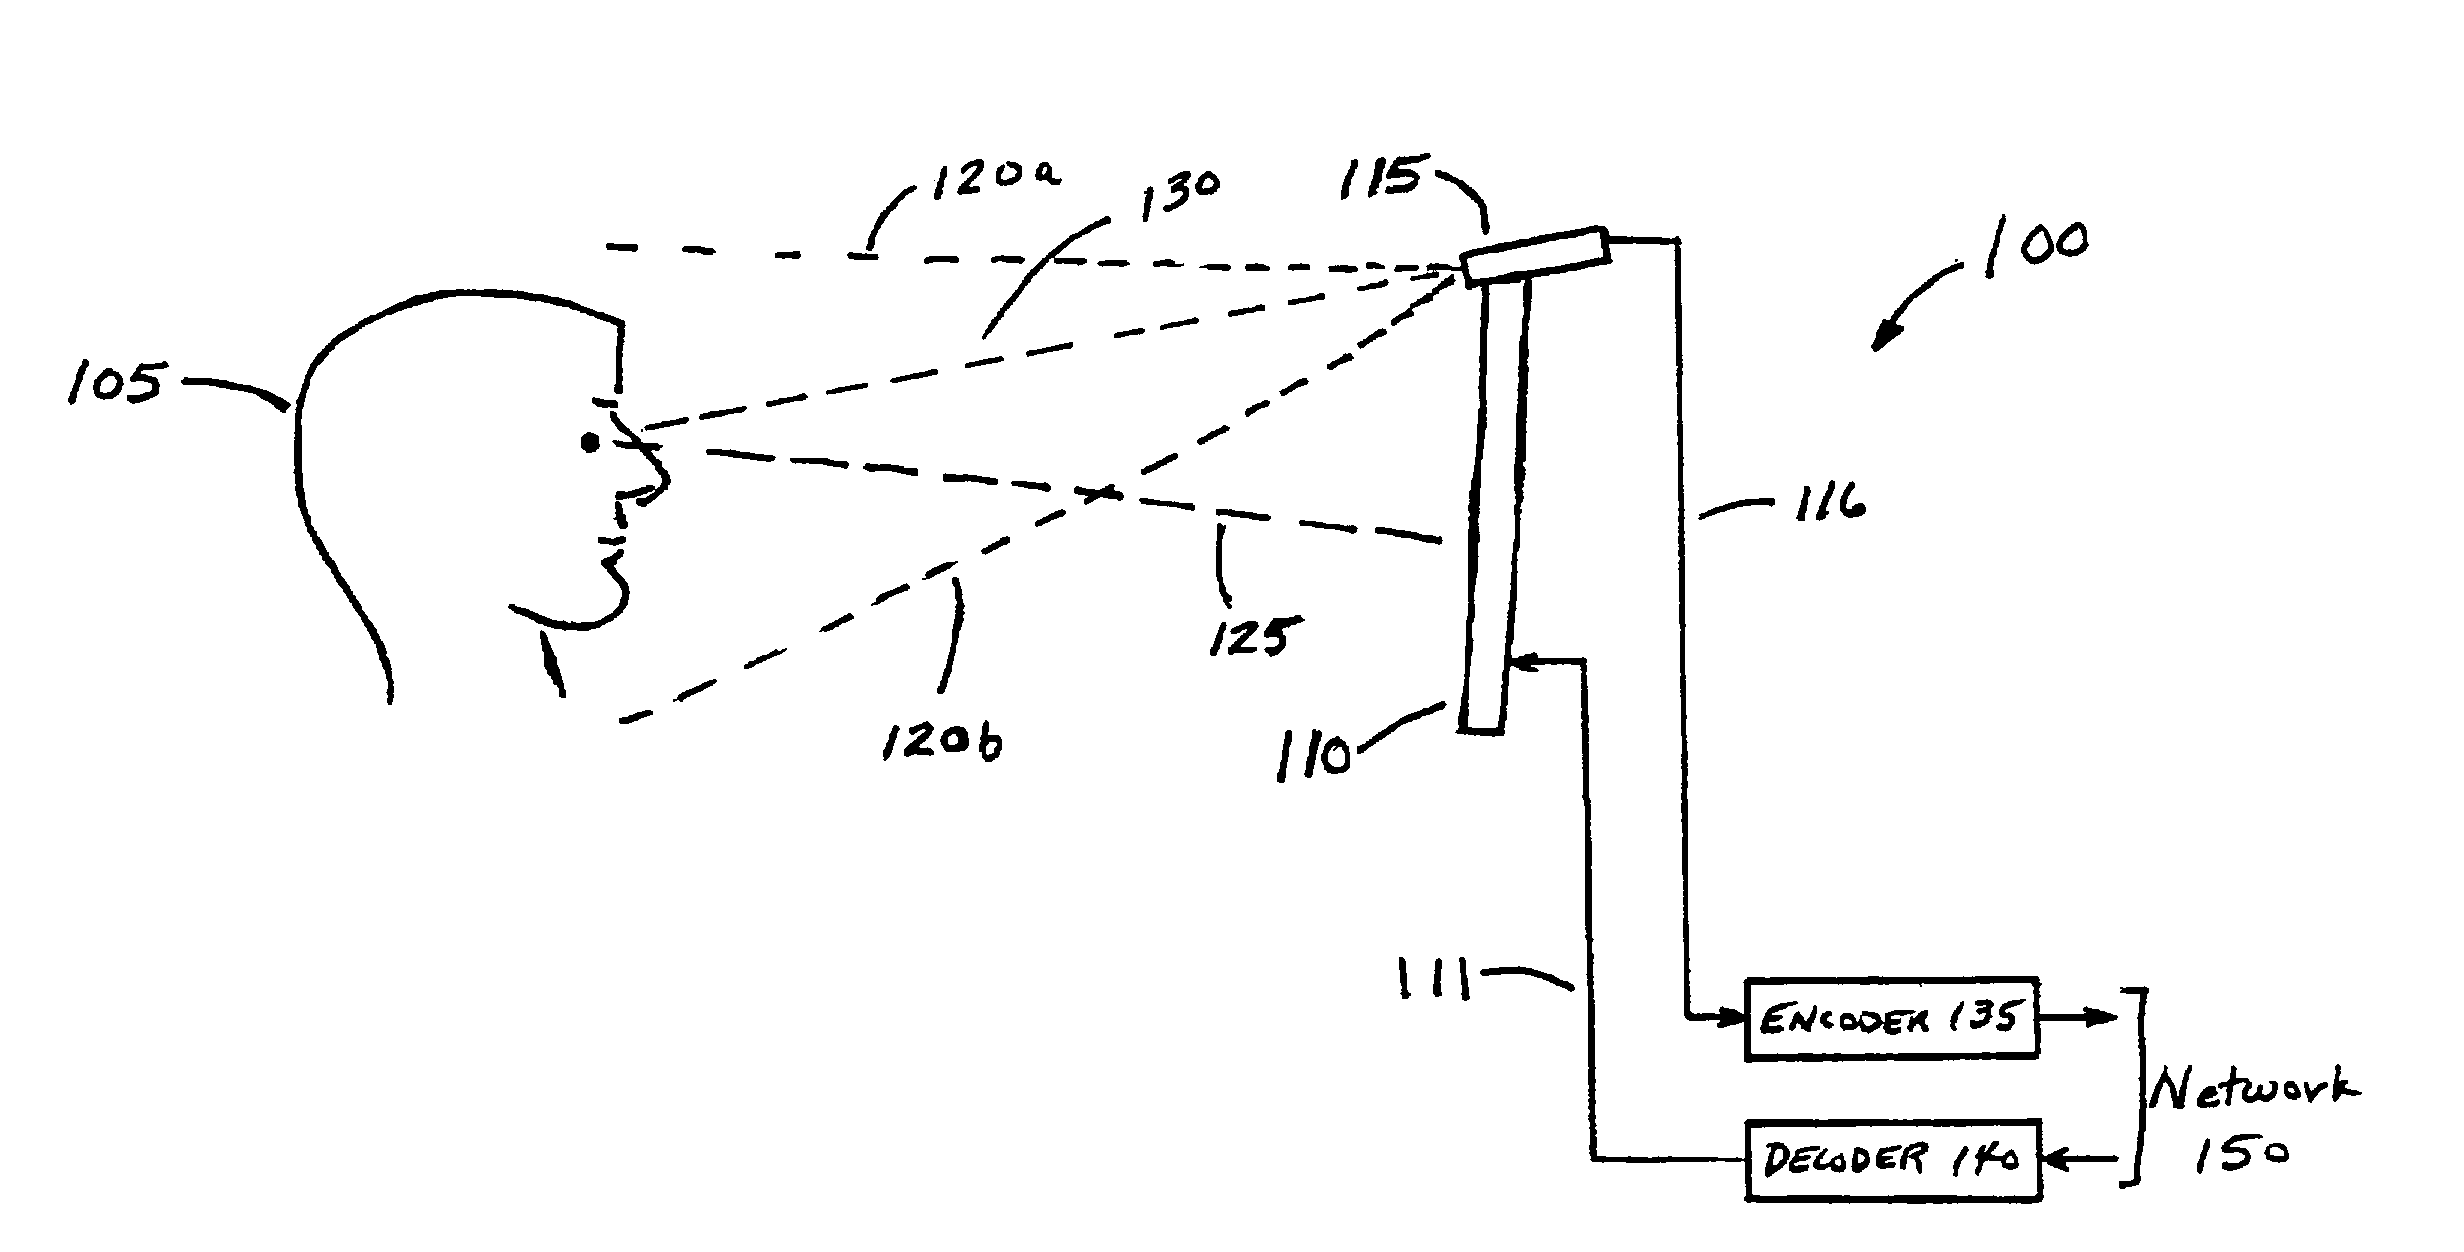 Integral eye-path alignment on telephony and computer video devices using two or more image sensing devices